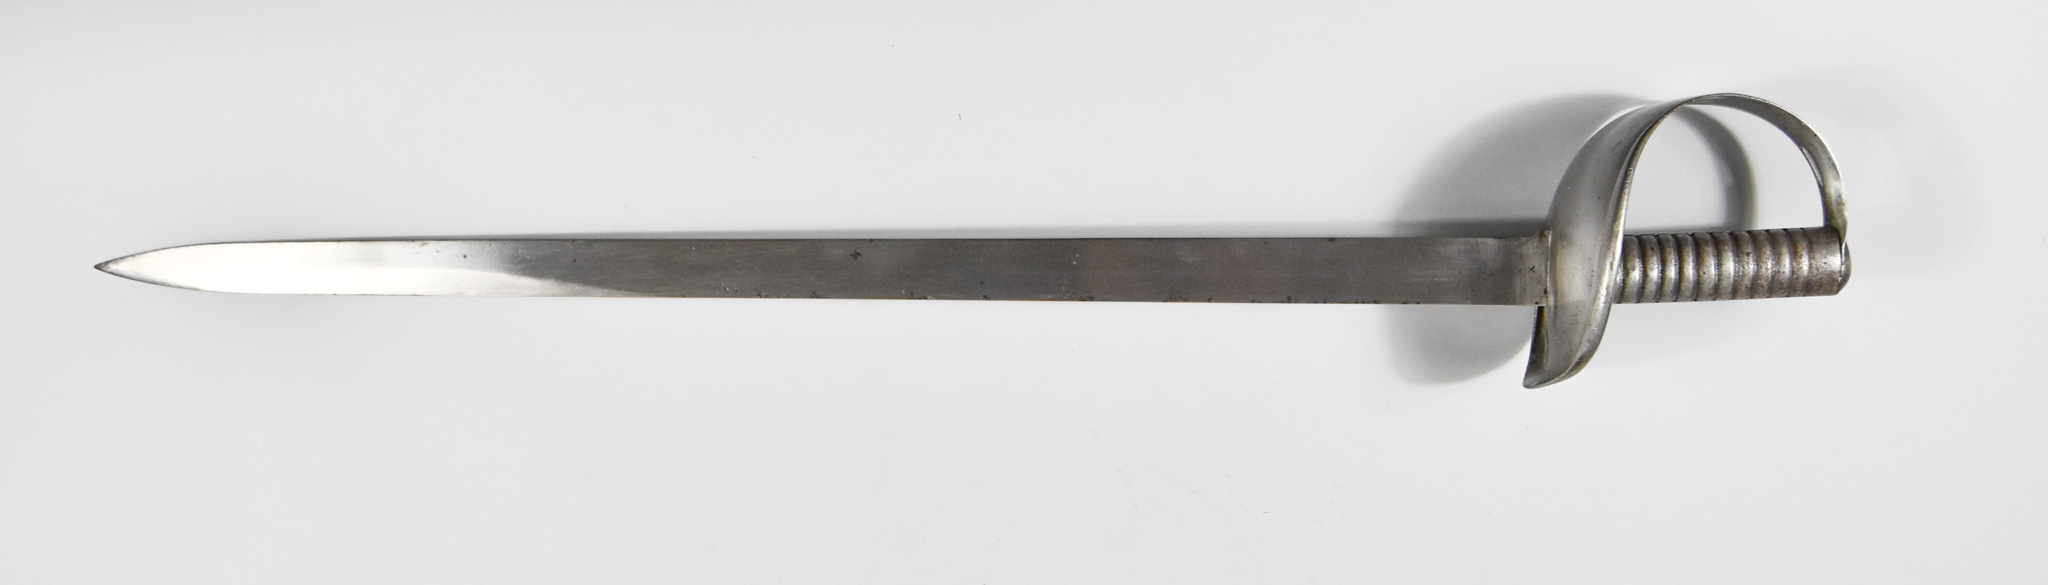 Late 19th Century/Early 20th Century Naval Cutlass, 28ins bright steel blade, steel guard with steel